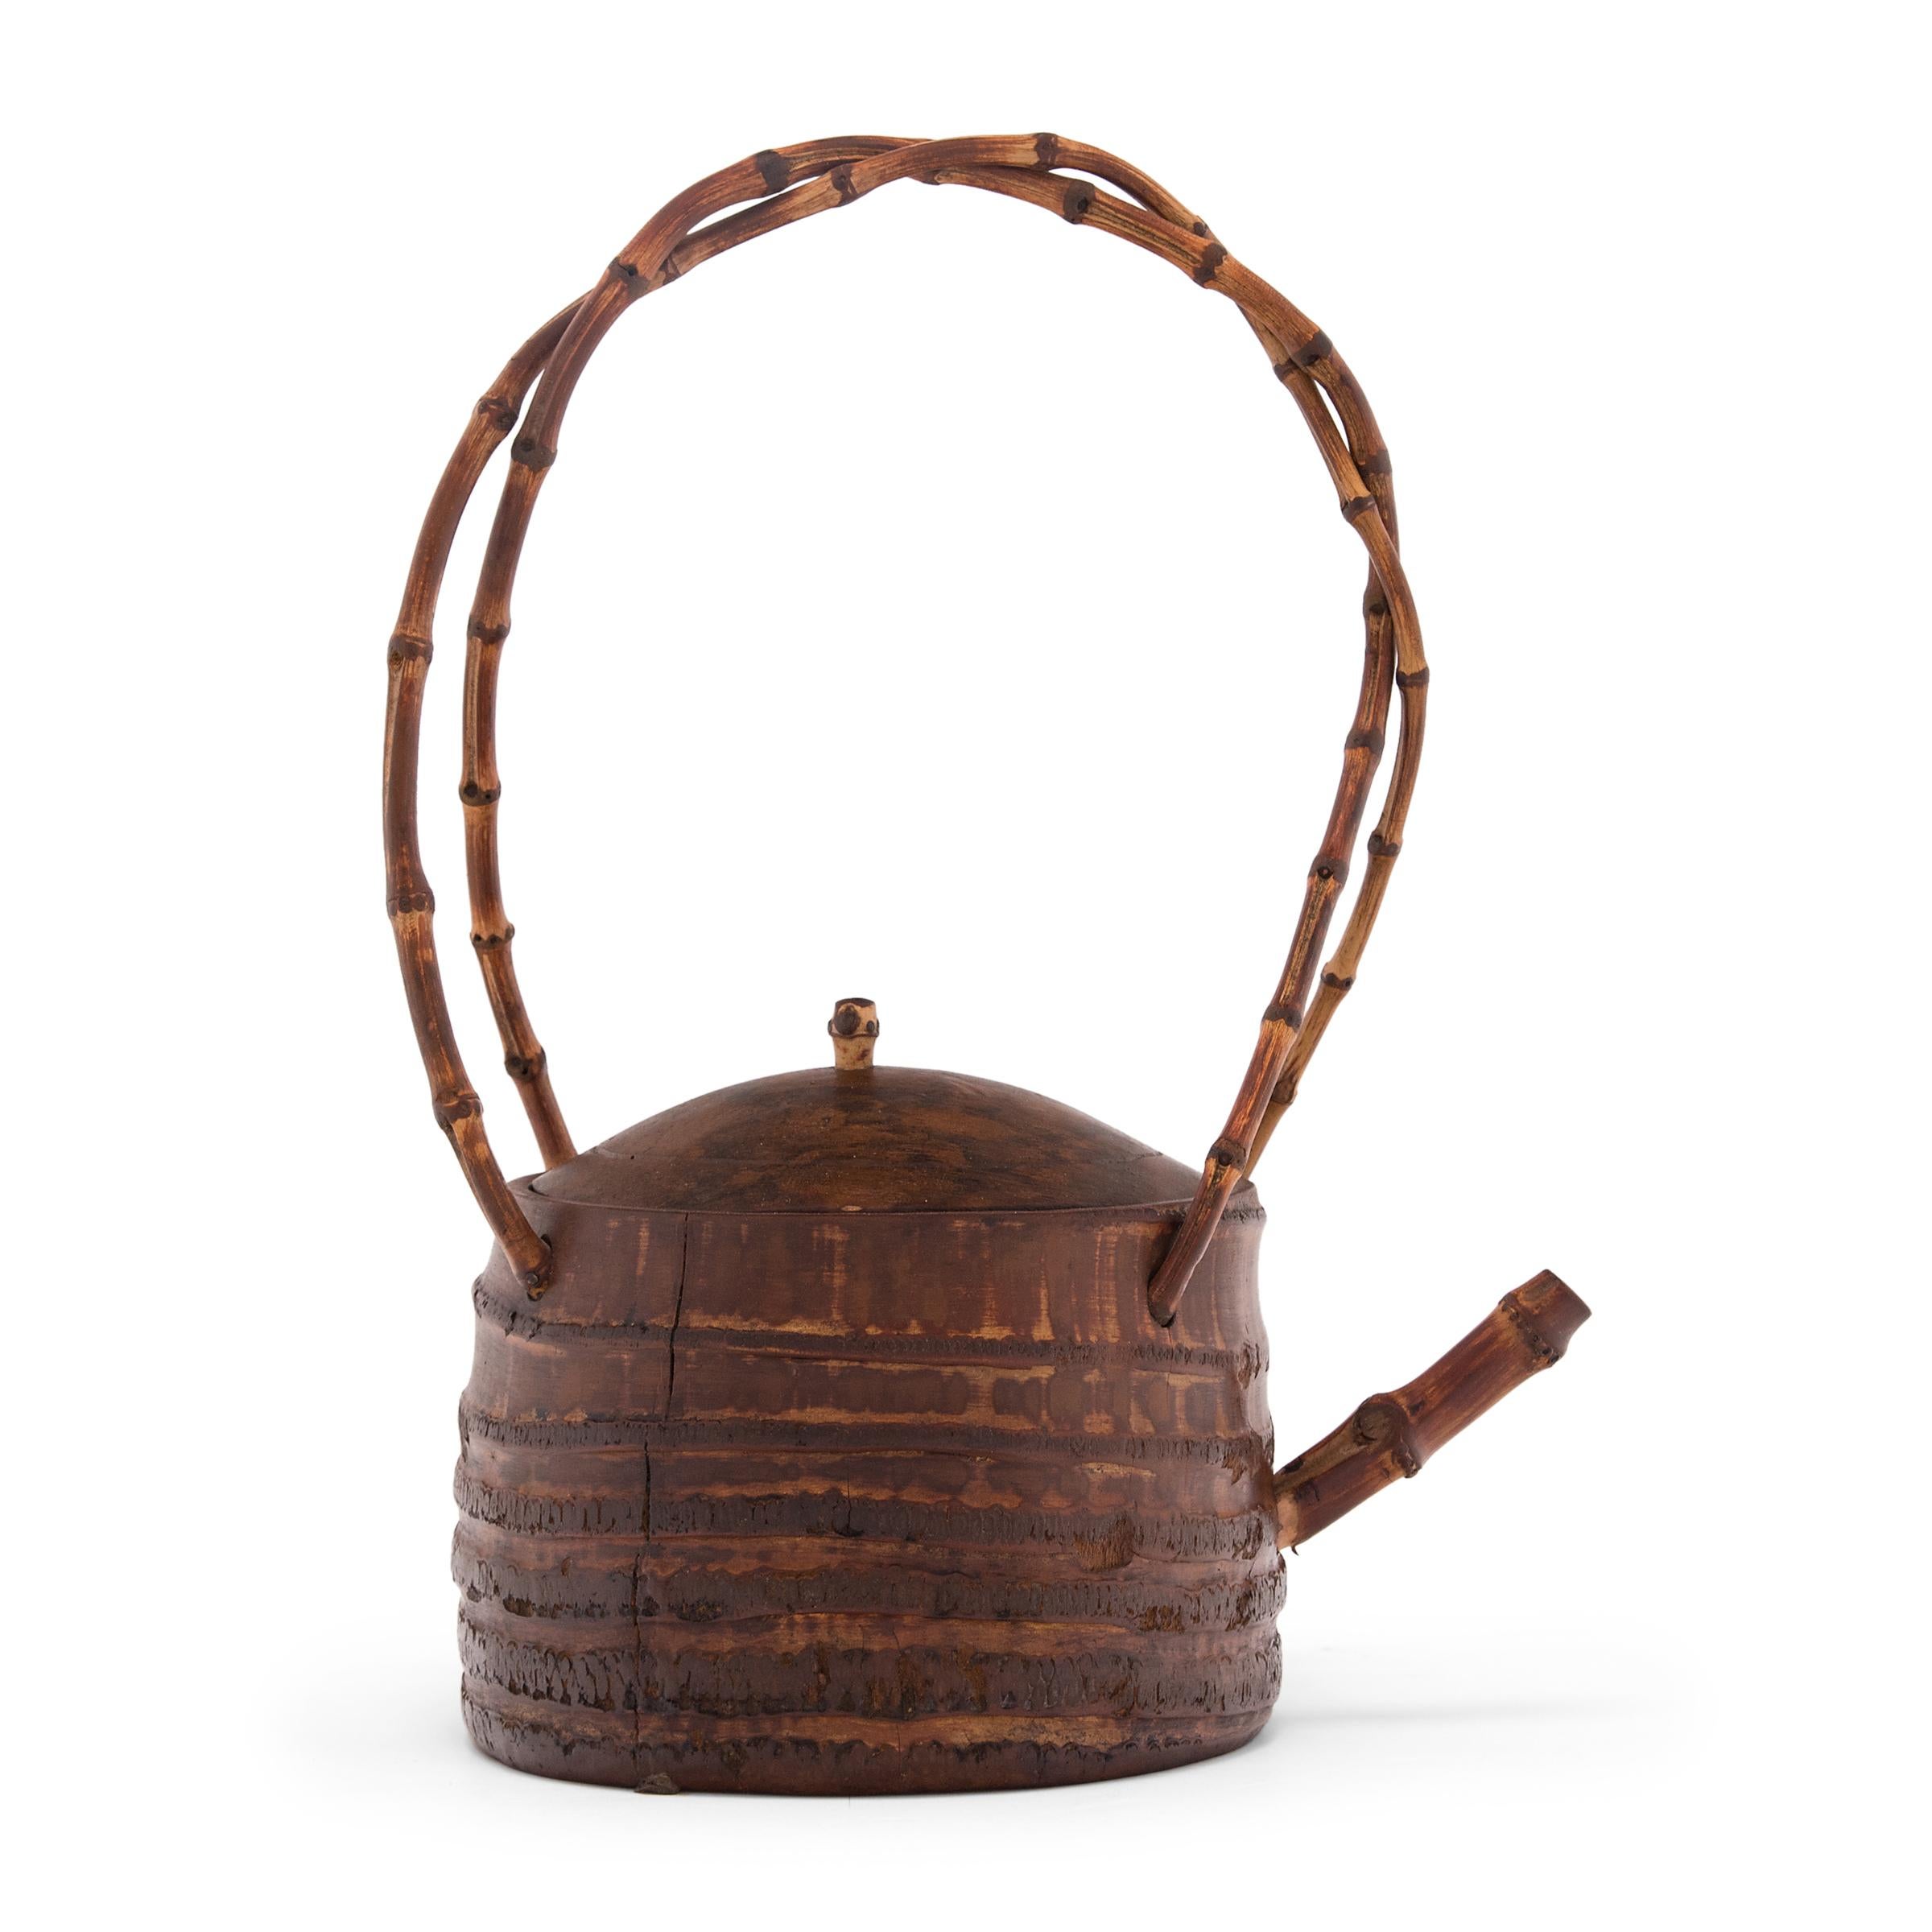 Rustic Chinese Bamboo Teapot with Arched Handle, c. 1900